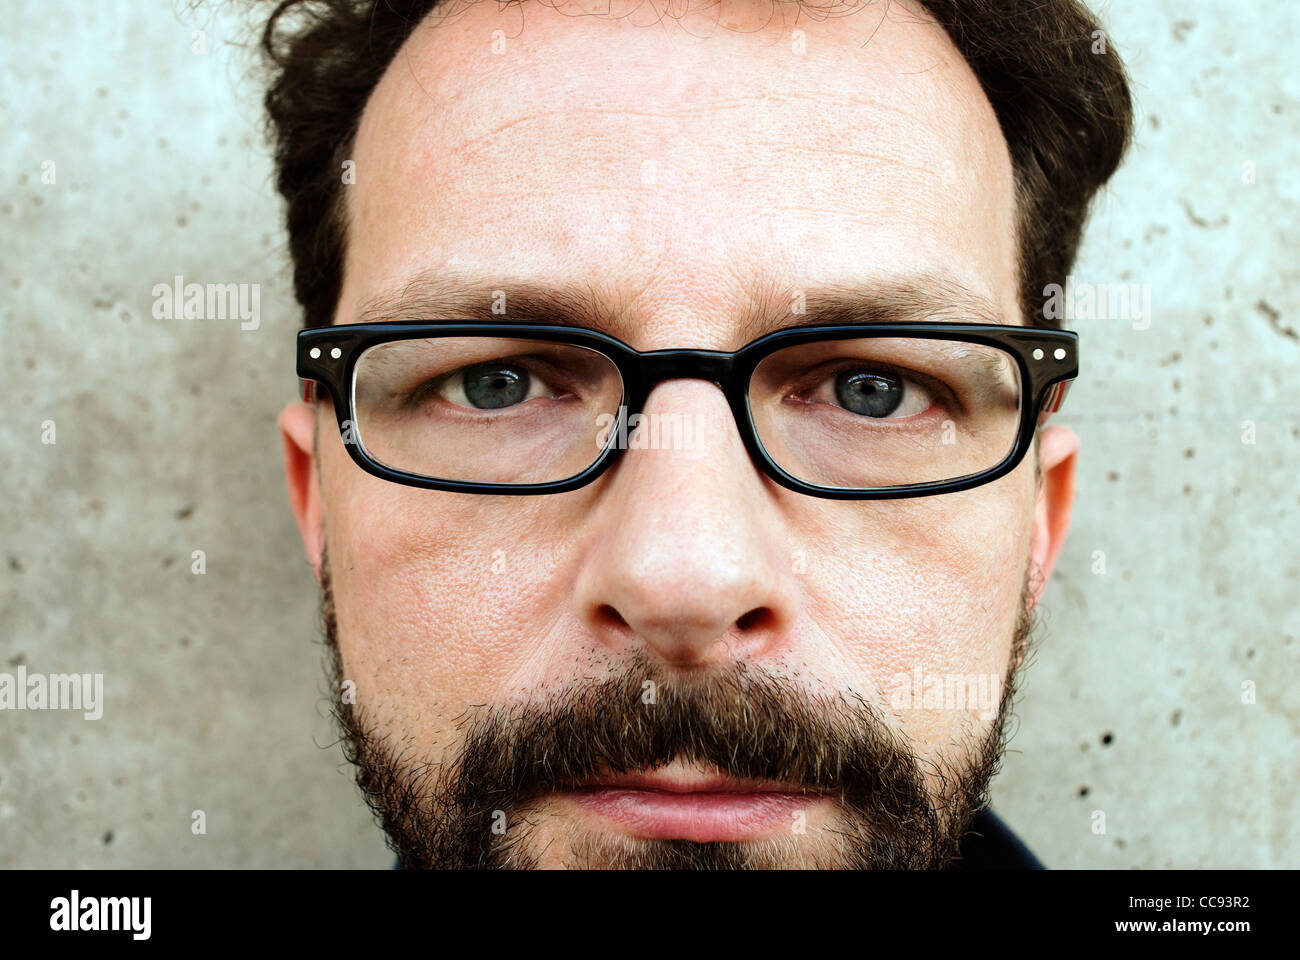 Man with glasses, age 40 Stock Photo